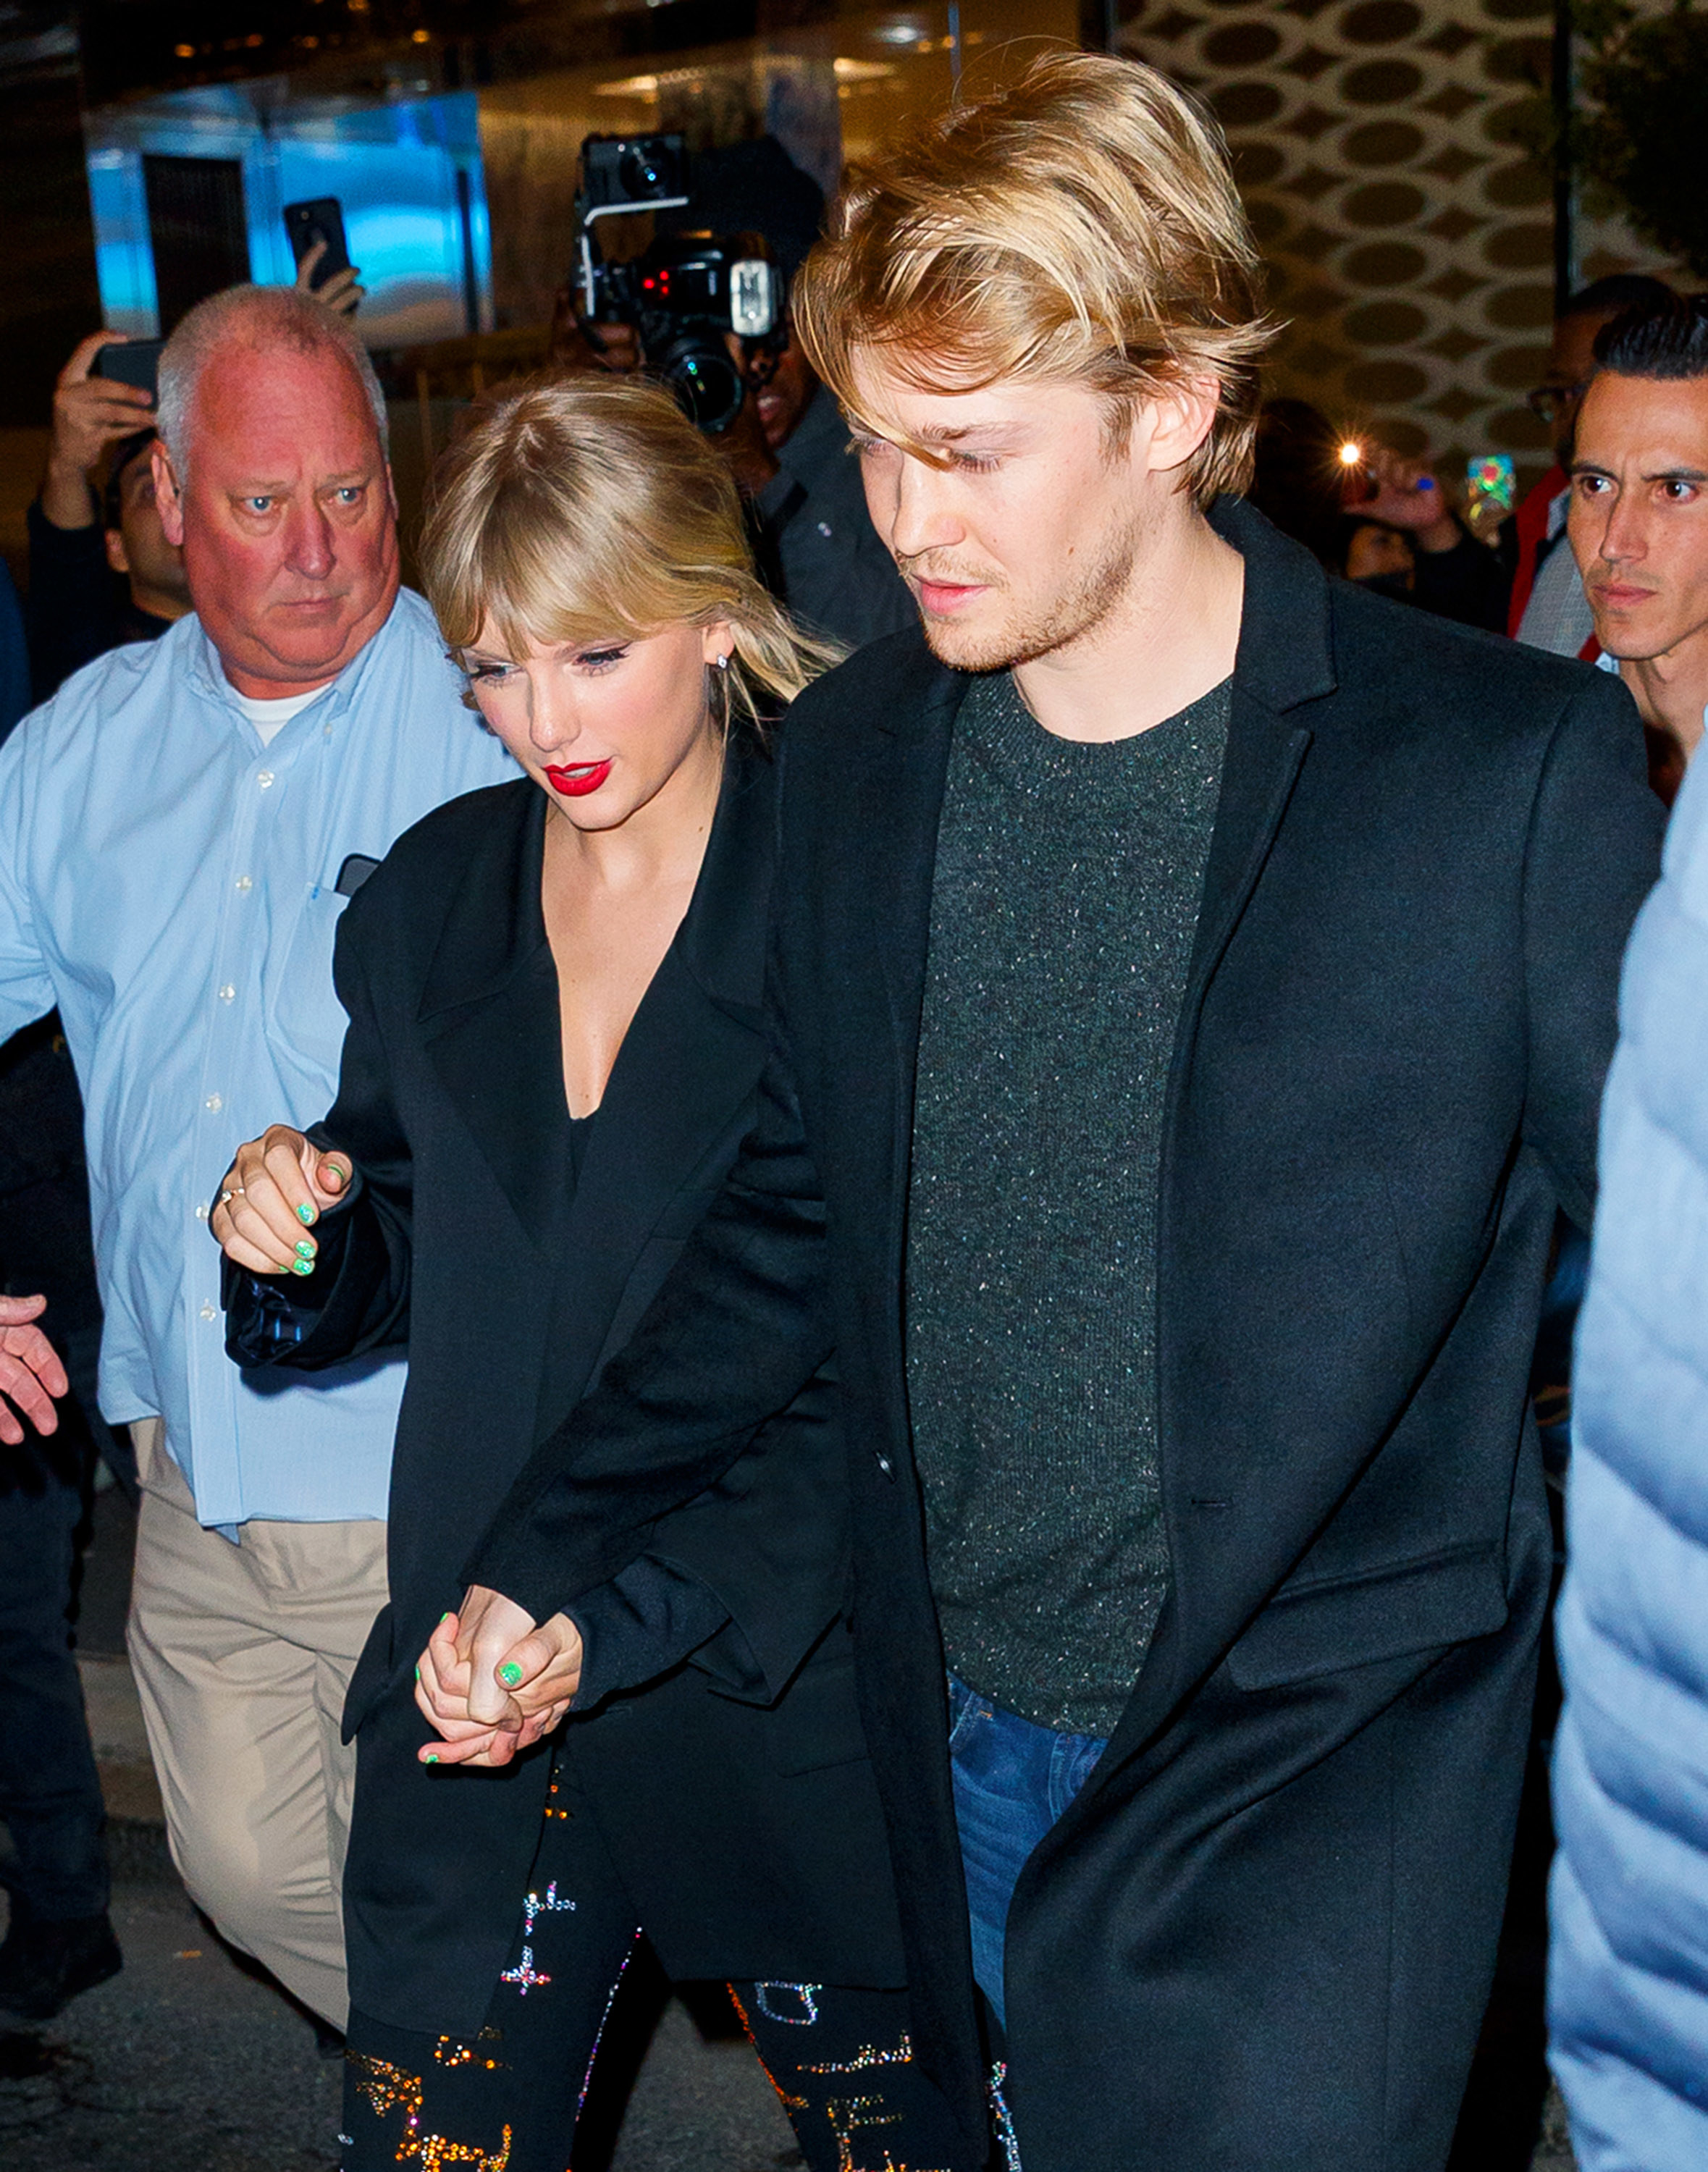 Taylor Swift and Joe Alwyn holding hands and walking